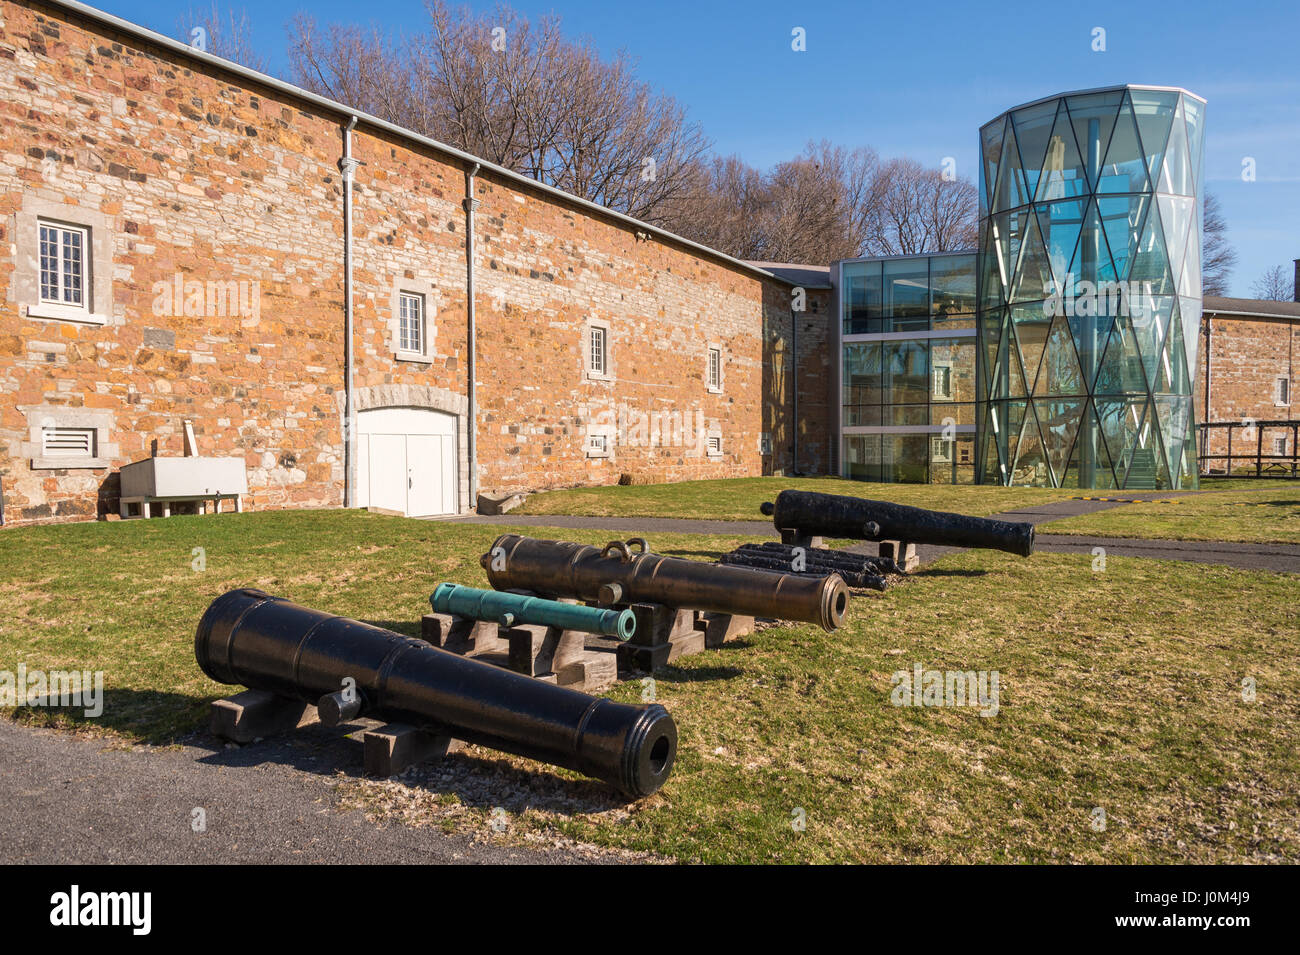 Montreal, CA - 13 April 2017: Stewart Museum Located at the British military depot on Saint Helen's Island, wit cannons in the foreground Stock Photo